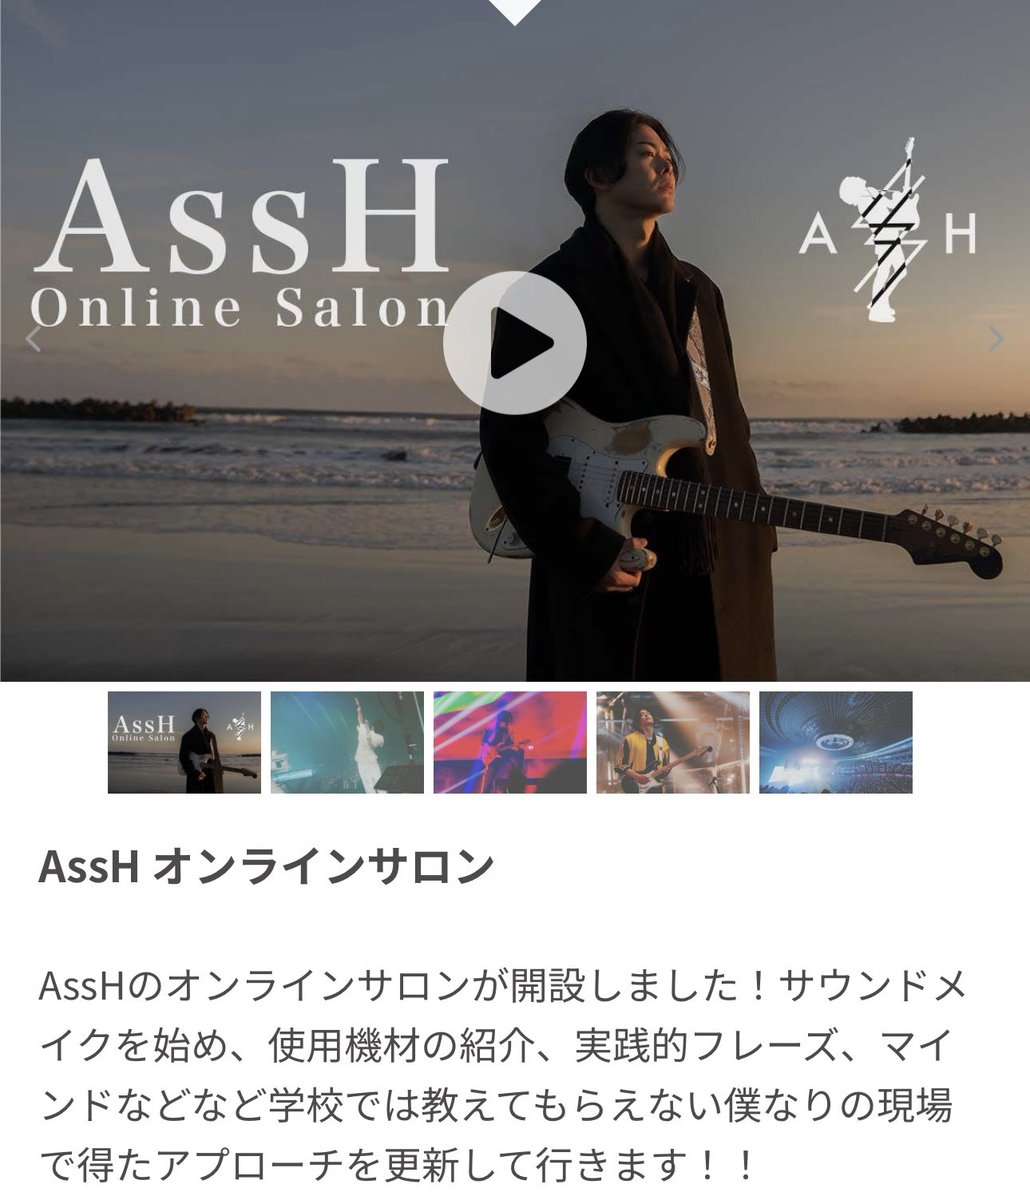 💿Release You can be anything - Single music.apple.com/jp/album/you-c… 📱ファンクラブ assh-official.bitfan.id 🎸オンラインサロン 初心者用 community.camp-fire.jp/projects/view/… マスタークラス community.camp-fire.jp/projects/view/…